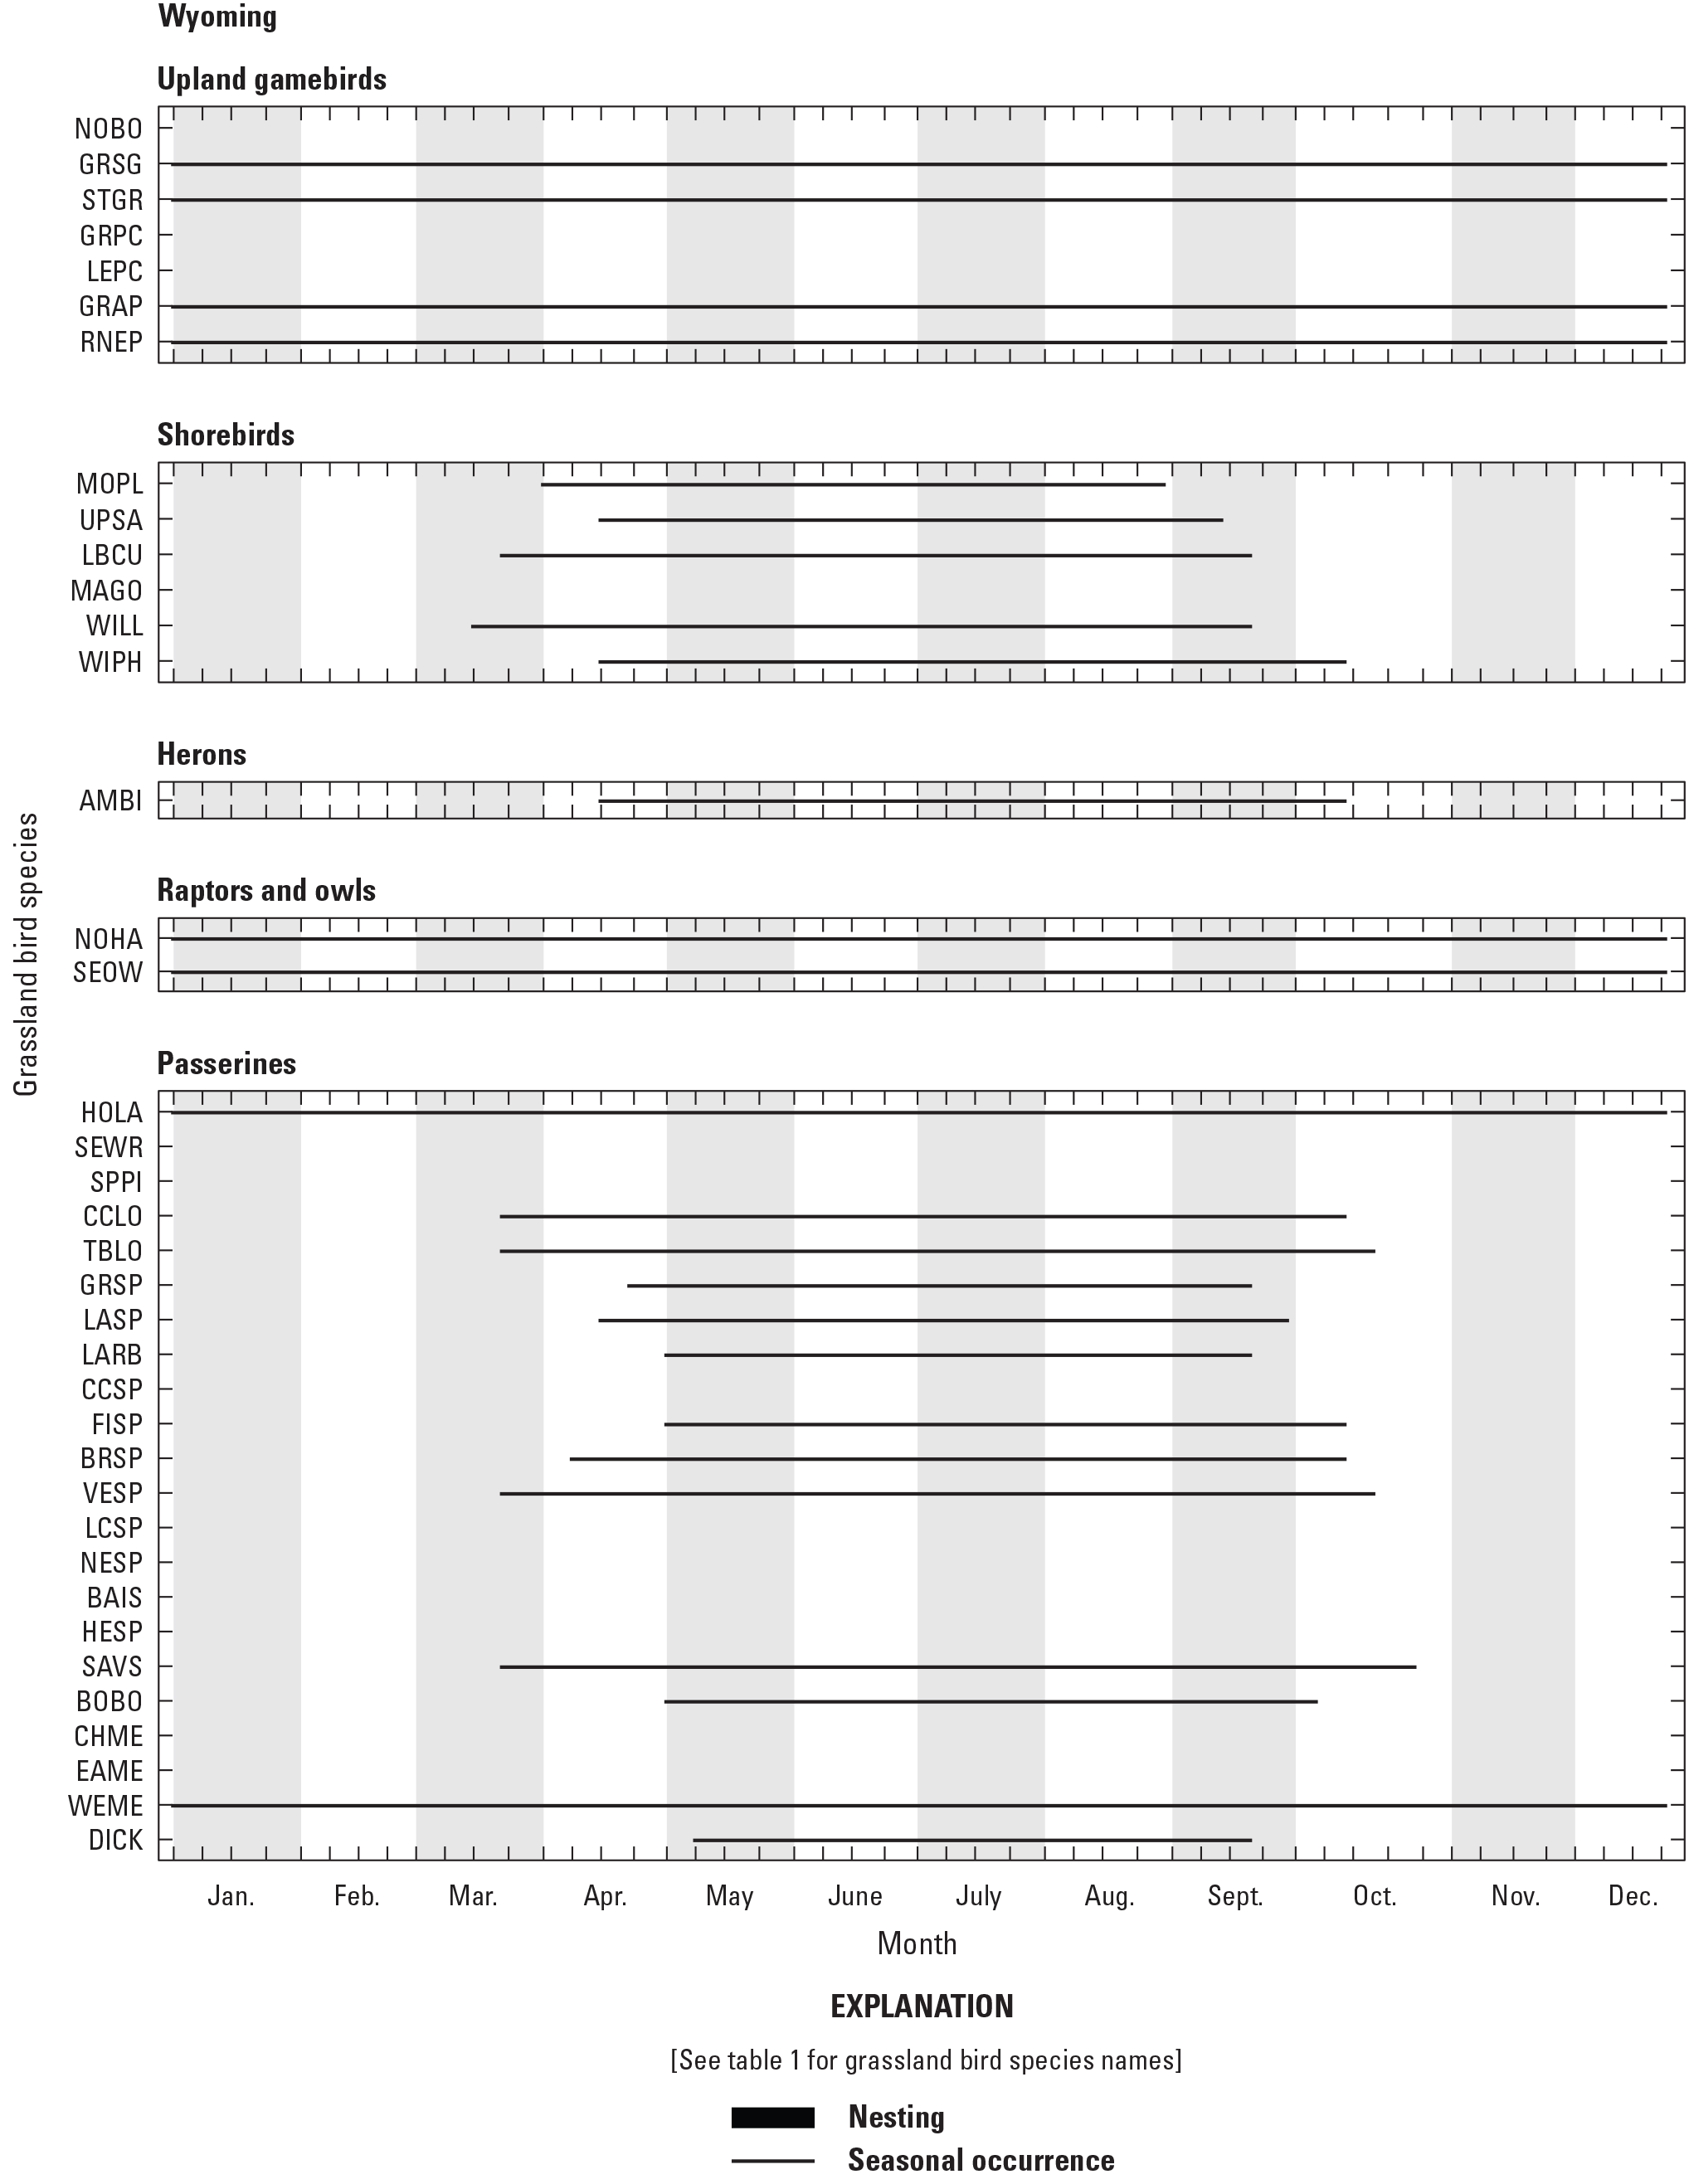 Figure showing seasonal occurrence and nesting phenology for 38 grassland bird species
               in Wyoming, United States.